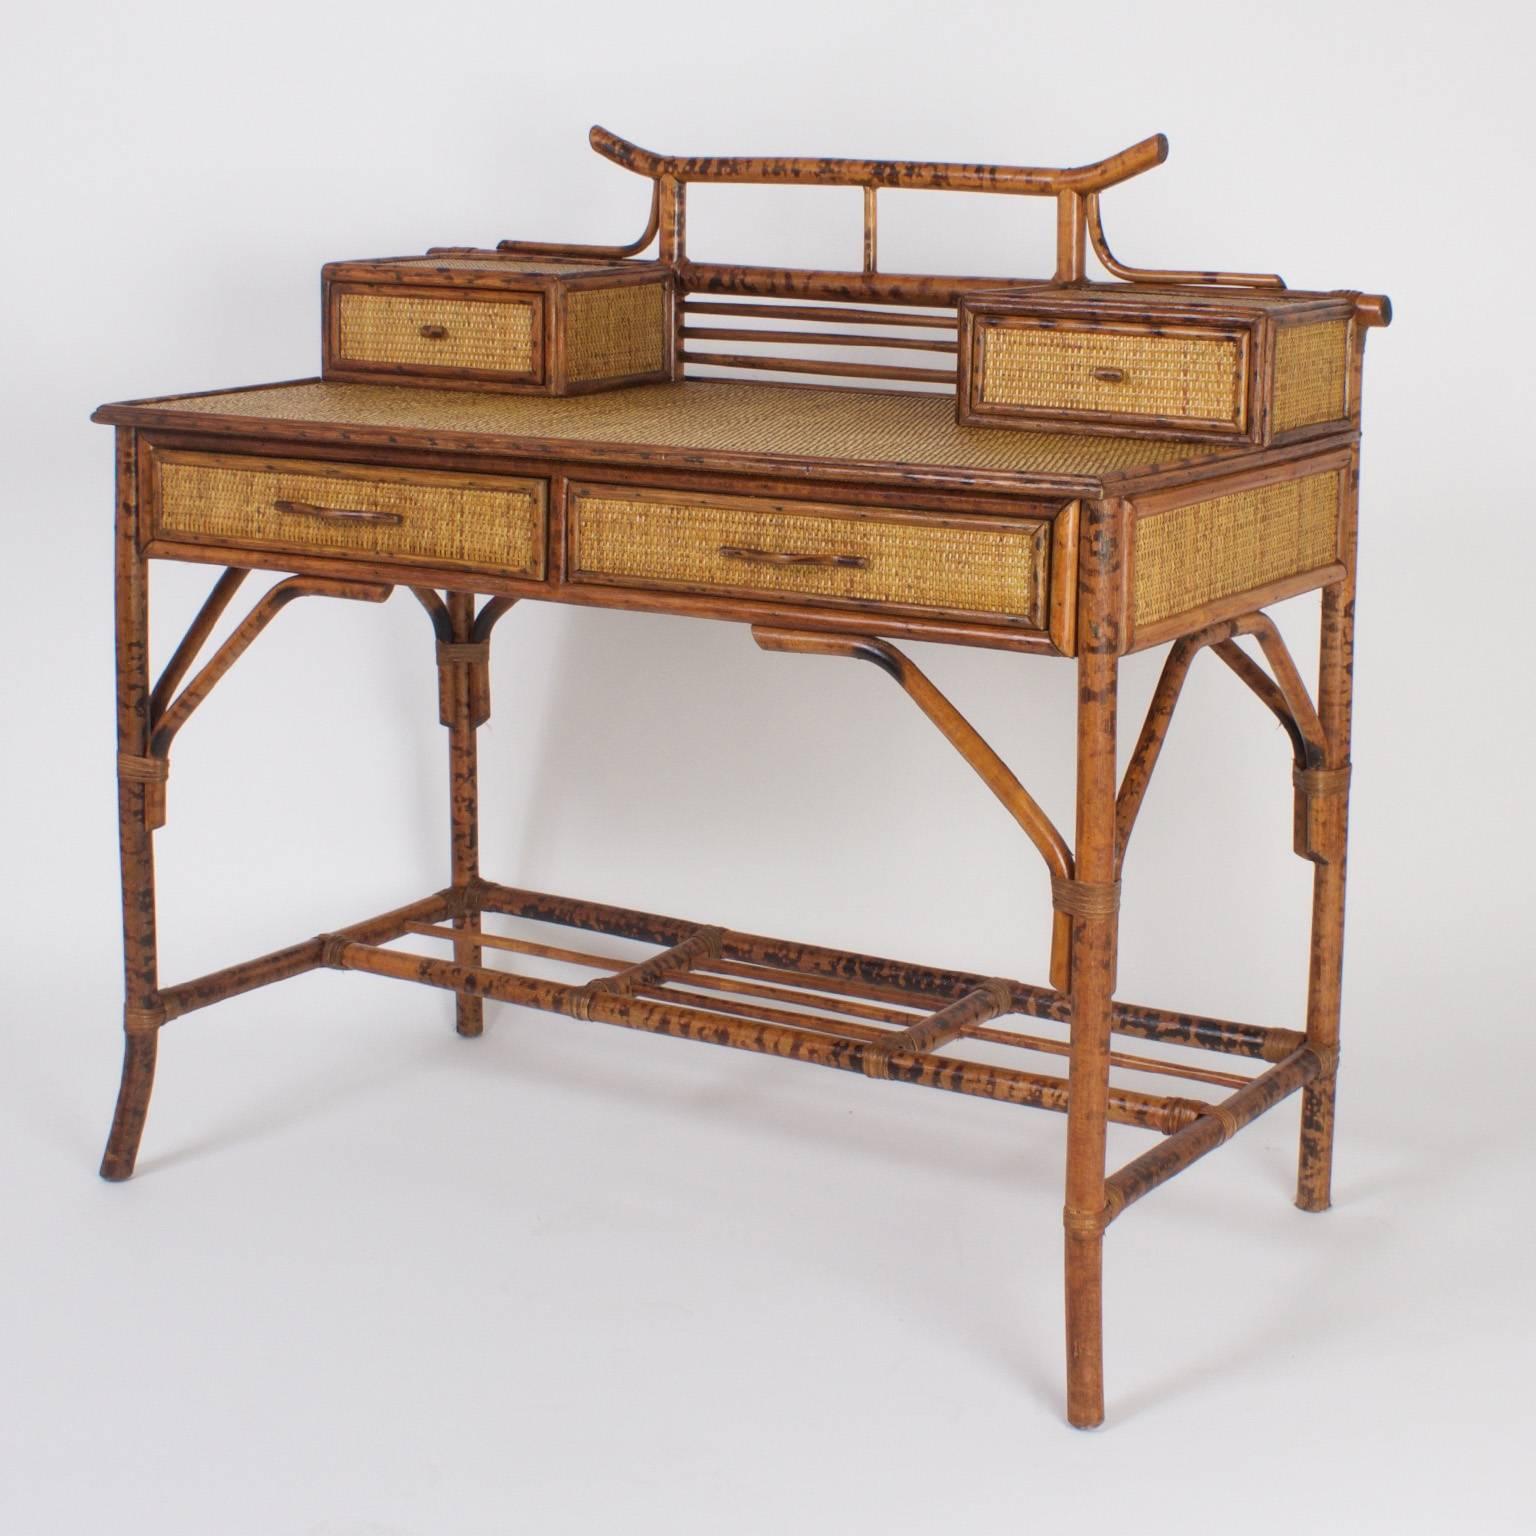 Brighton Pavillion style chinoiserie faux bamboo and grass cloth desk or writing table with matching caned seat chair, both having a distinctive pagoda ornament at the tops and Asian style splayed legs. 

Measures: Seat height 17.5.